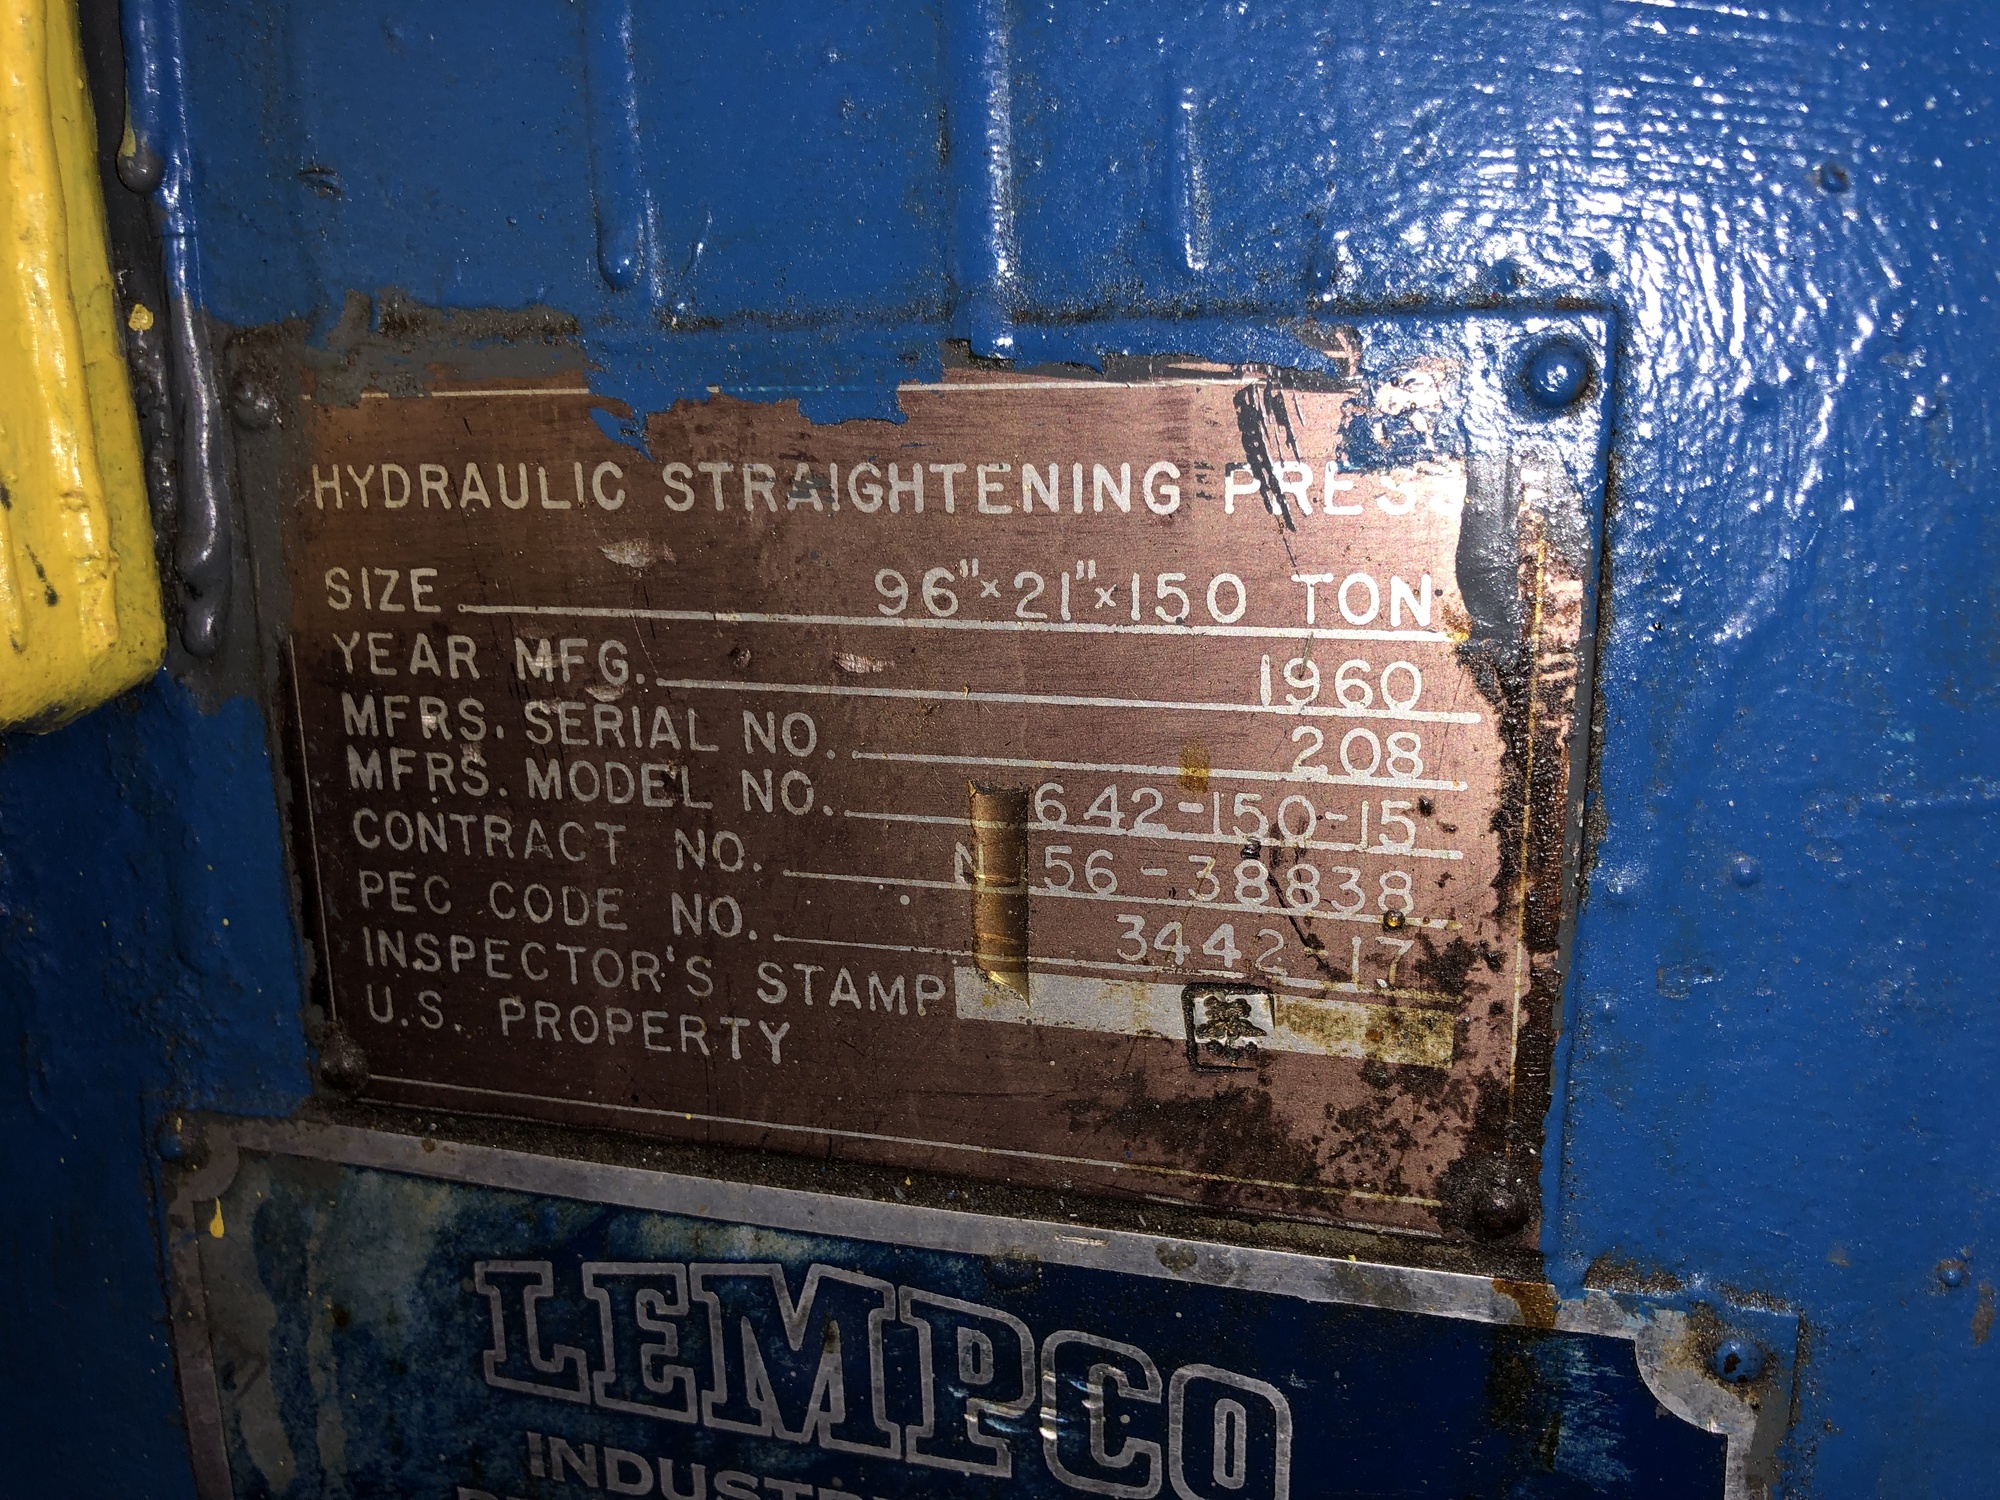 1960 LEMCO 642-150-15 Straightening Presses | New England Industrial Machinery